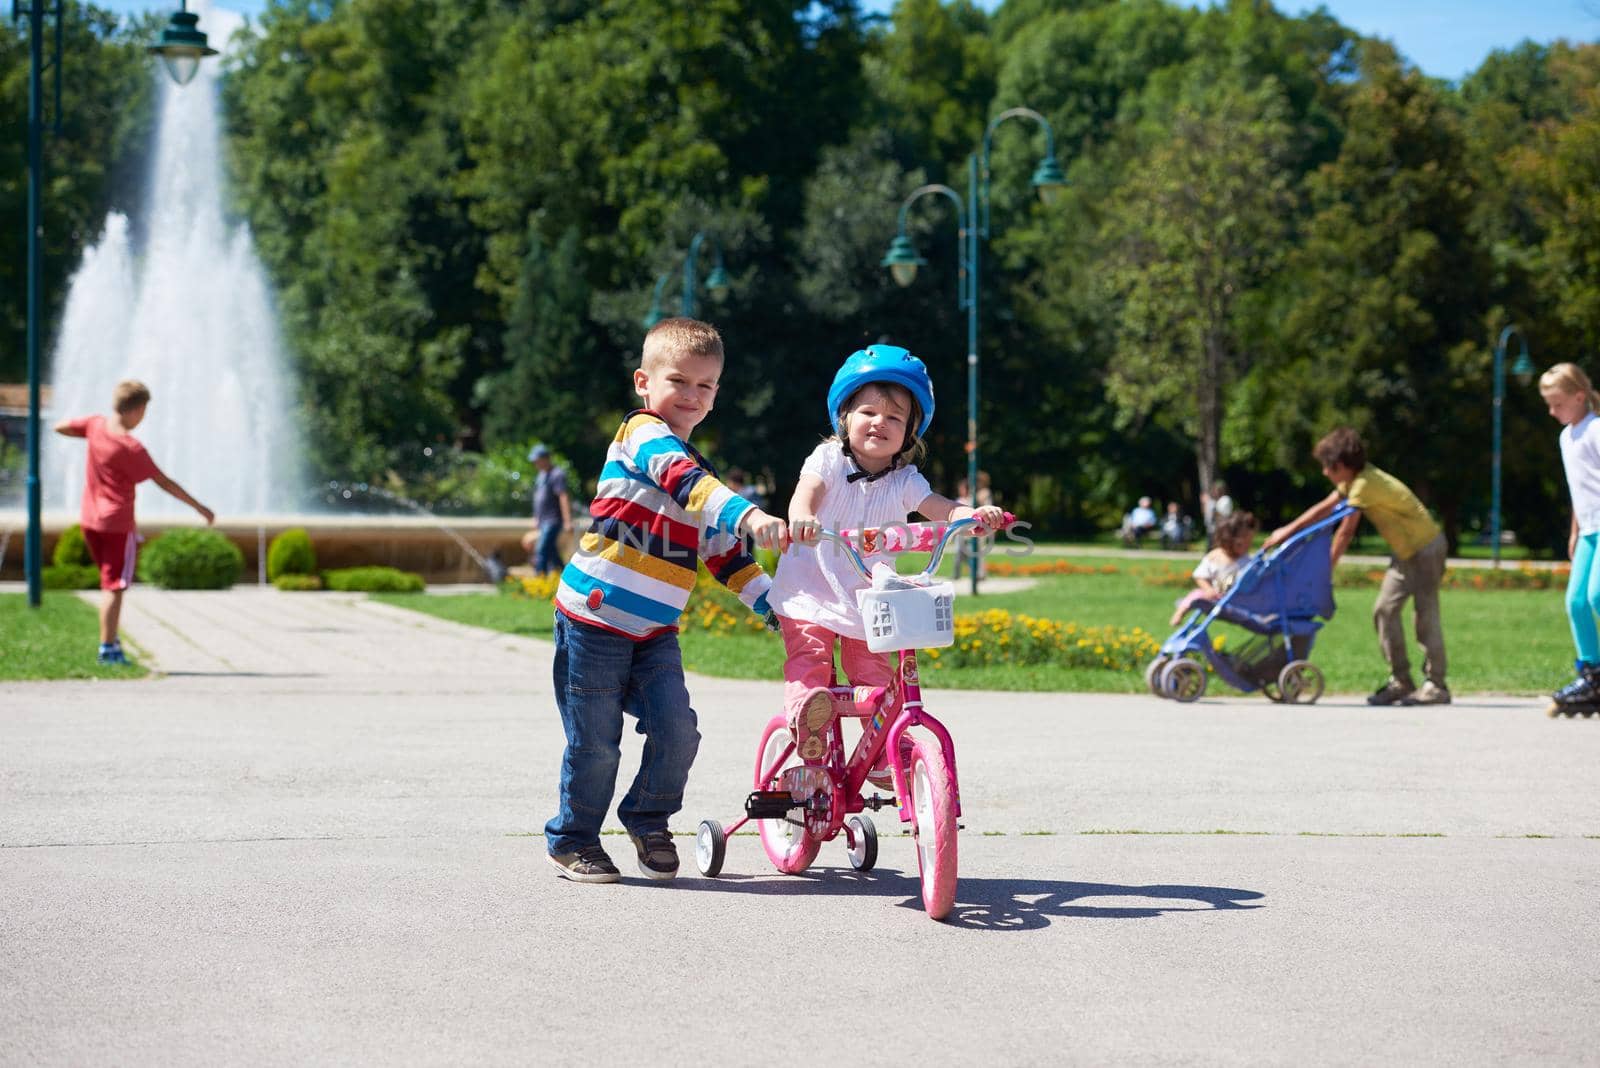 Boy and girl in park learning to ride a bike by dotshock